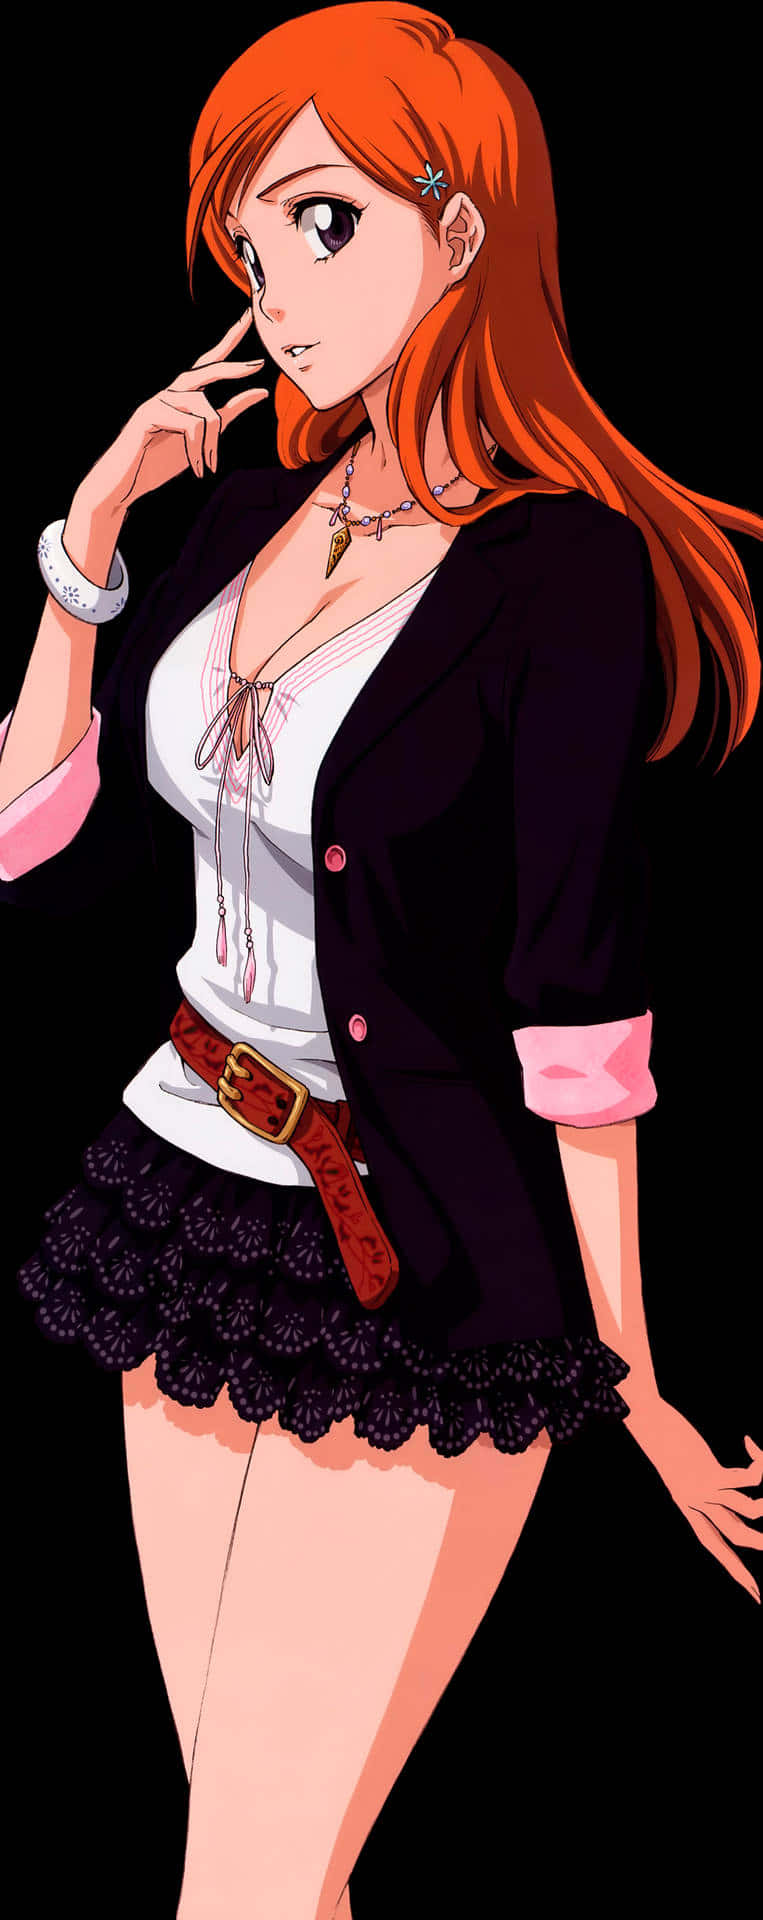 Orihime Inoue – A Strong-Willed Anime Character Wallpaper